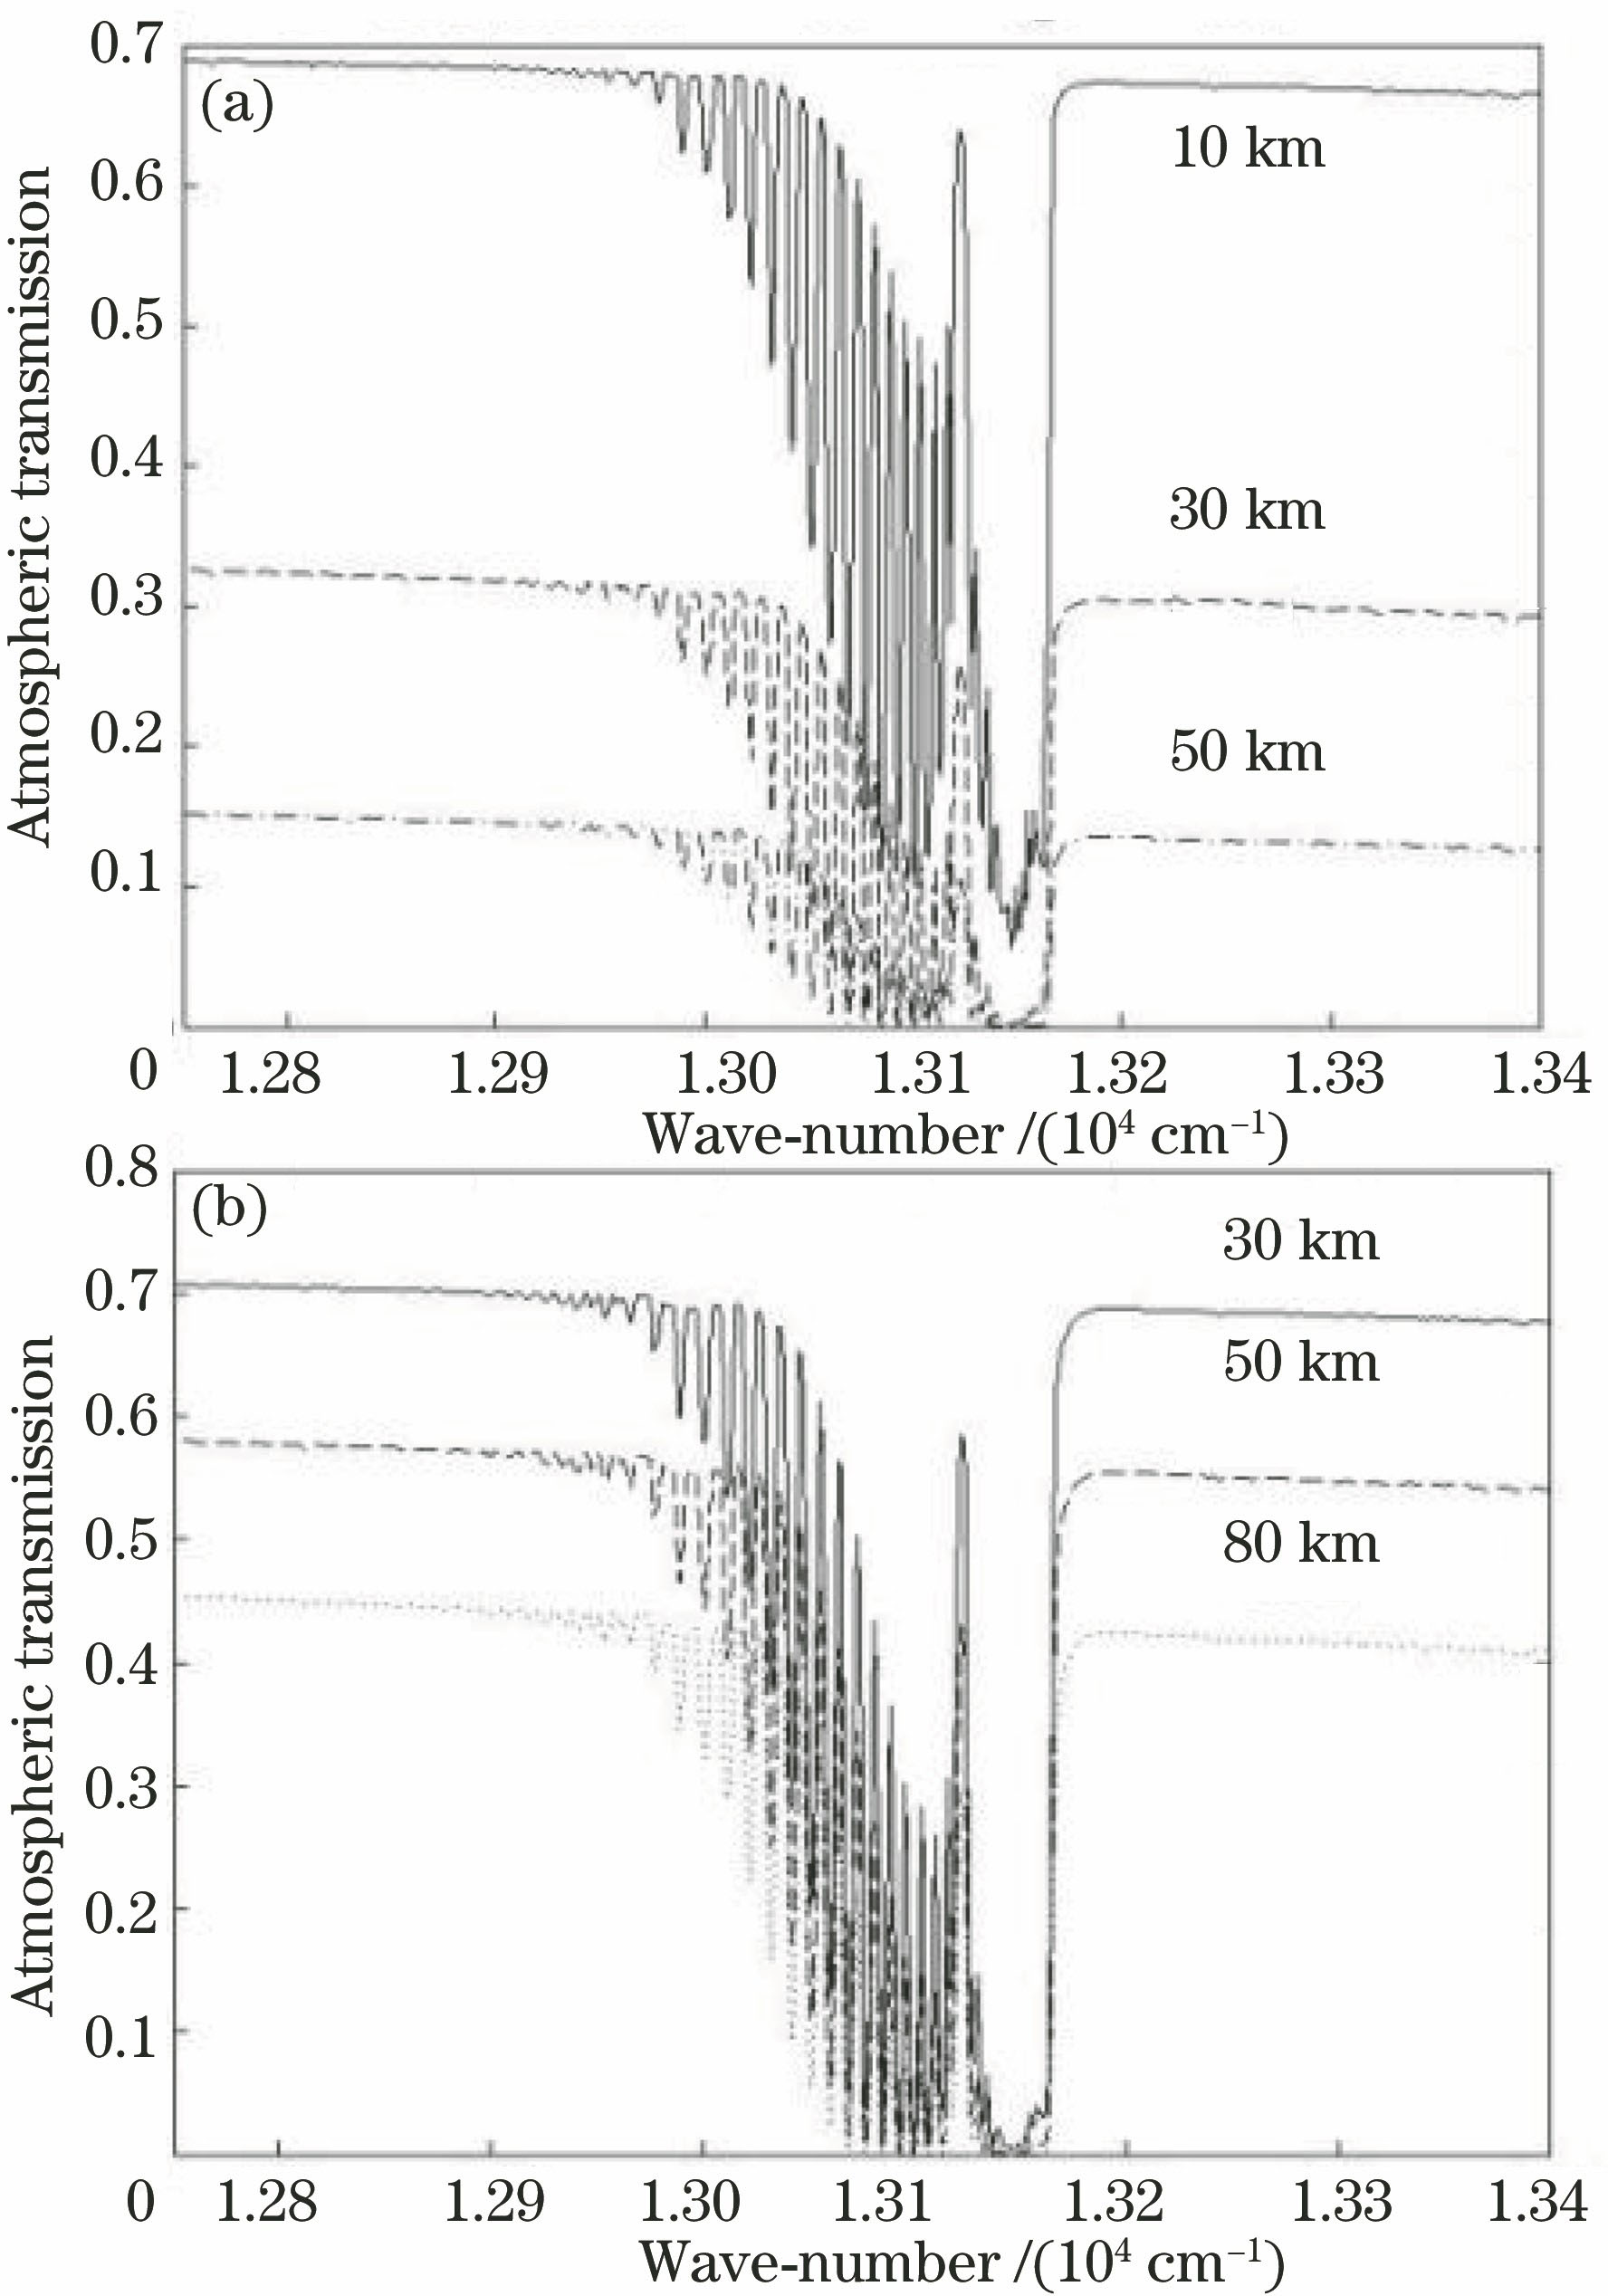 Curves of atmospheric transmission of different detection ranges with different models. (a) Model of ground-based detecting; (b) model of air-based detecting